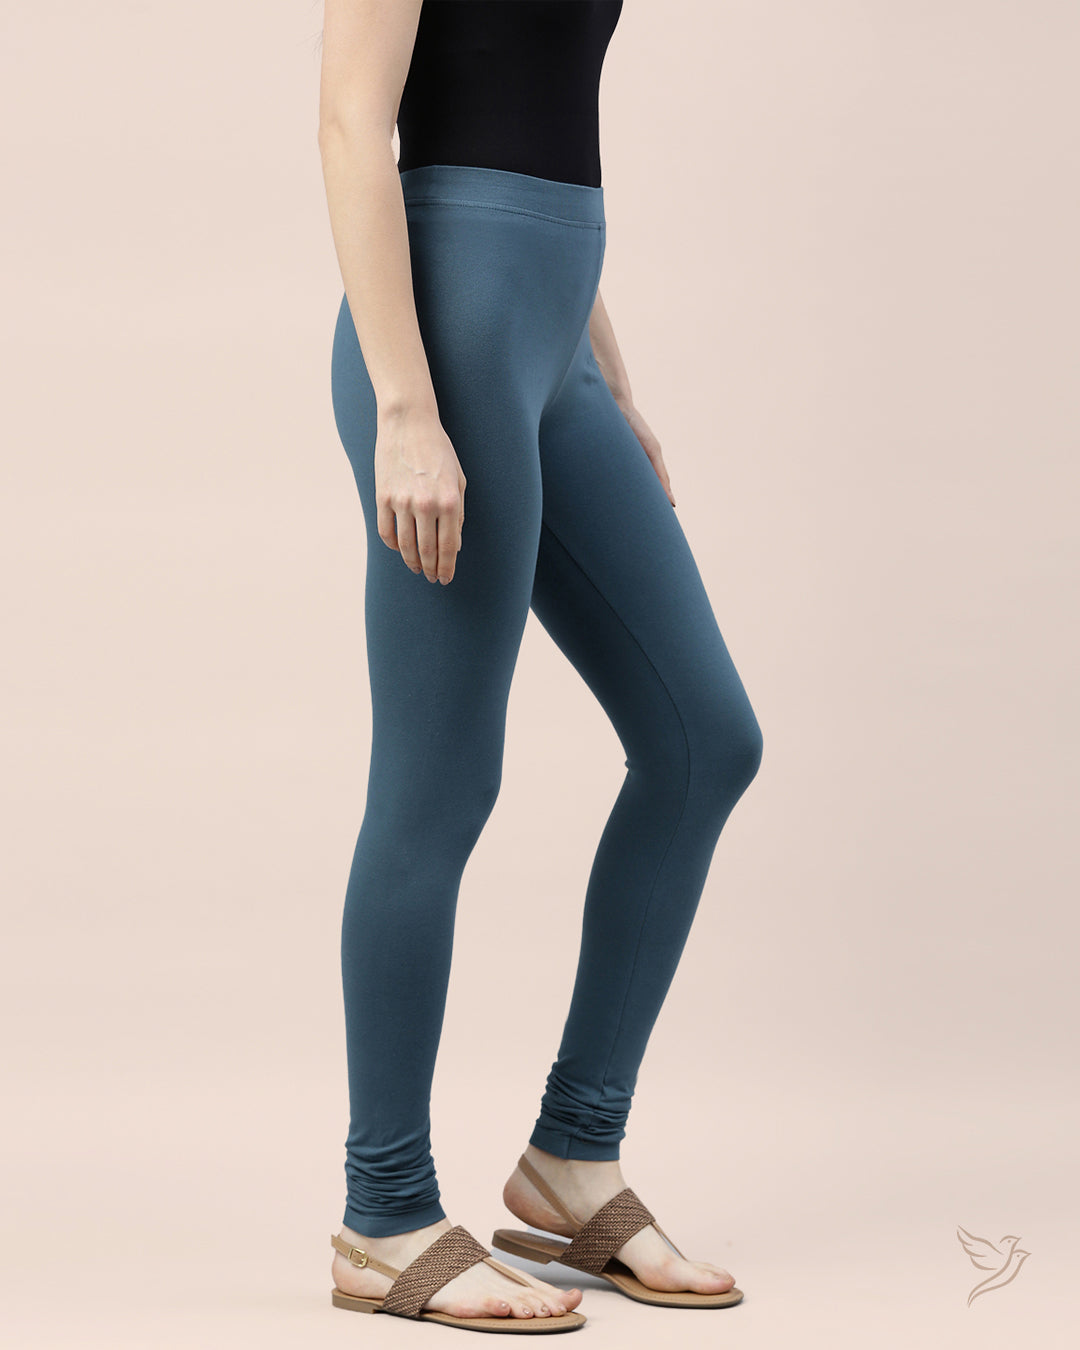 Twin Birds Rare Jade Girls Legging - Get Best Price from Manufacturers &  Suppliers in India